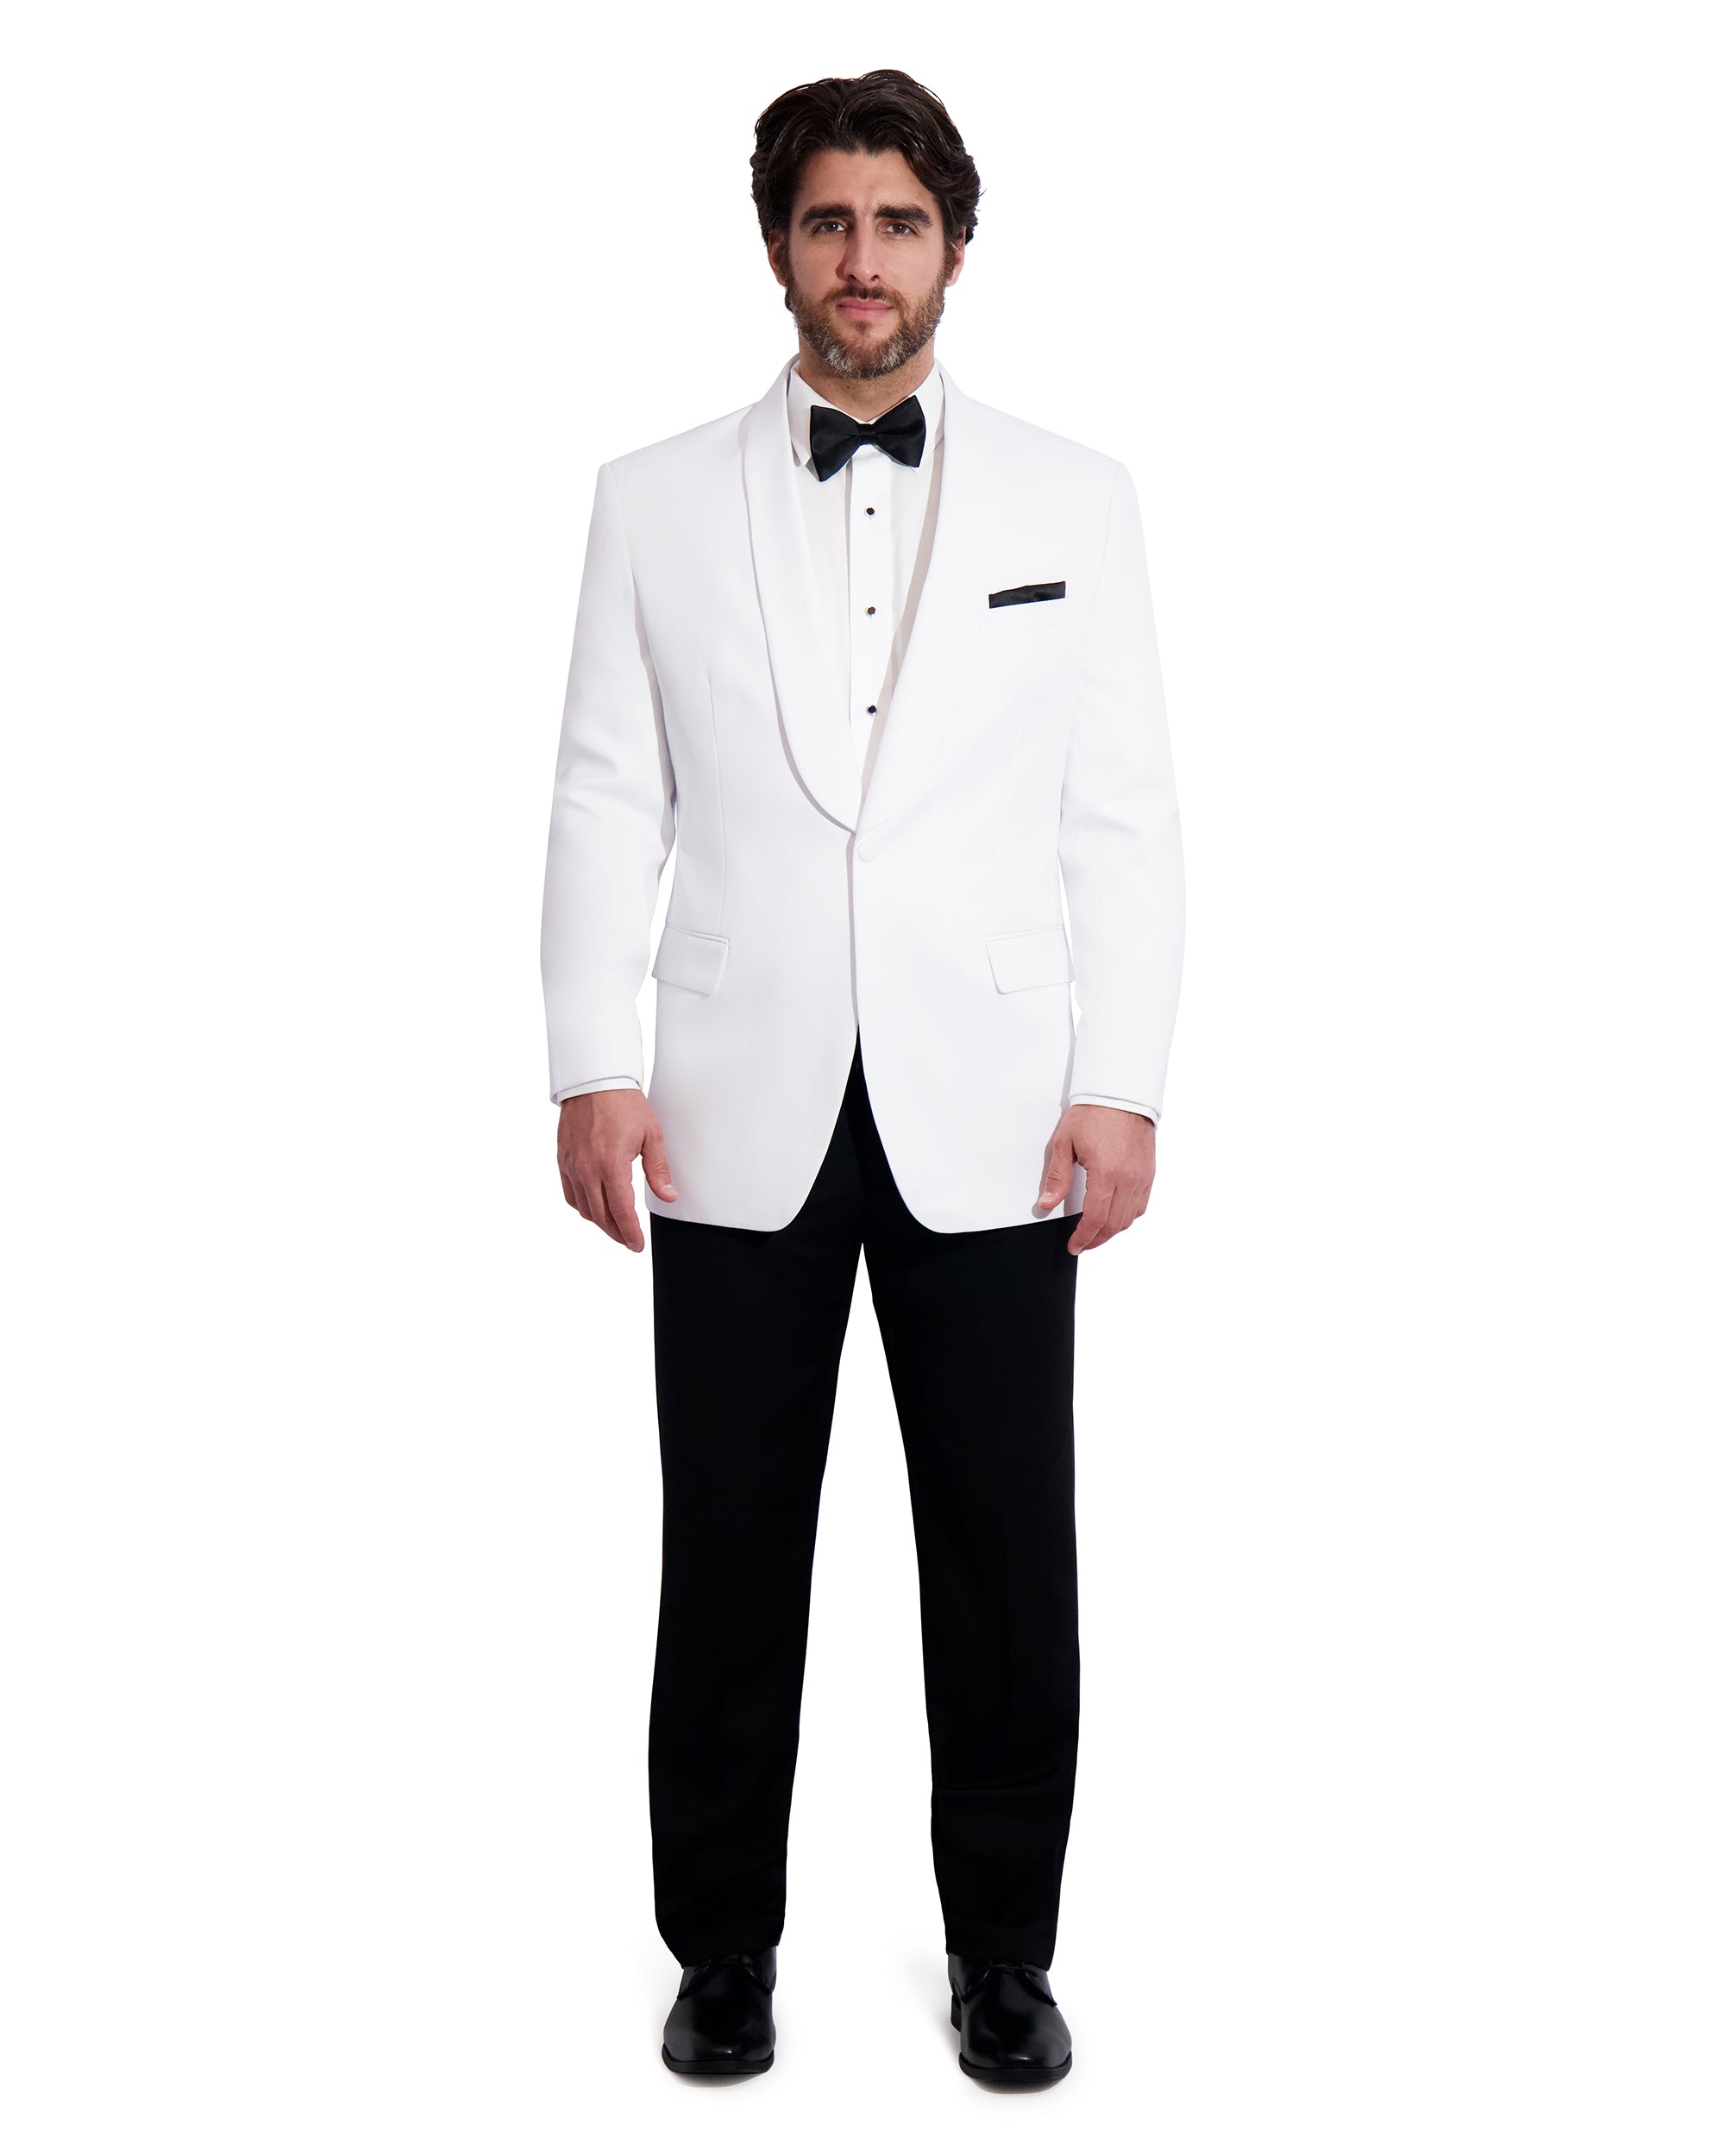 MENS WHITE DINNER JACKET – Fabian Couture